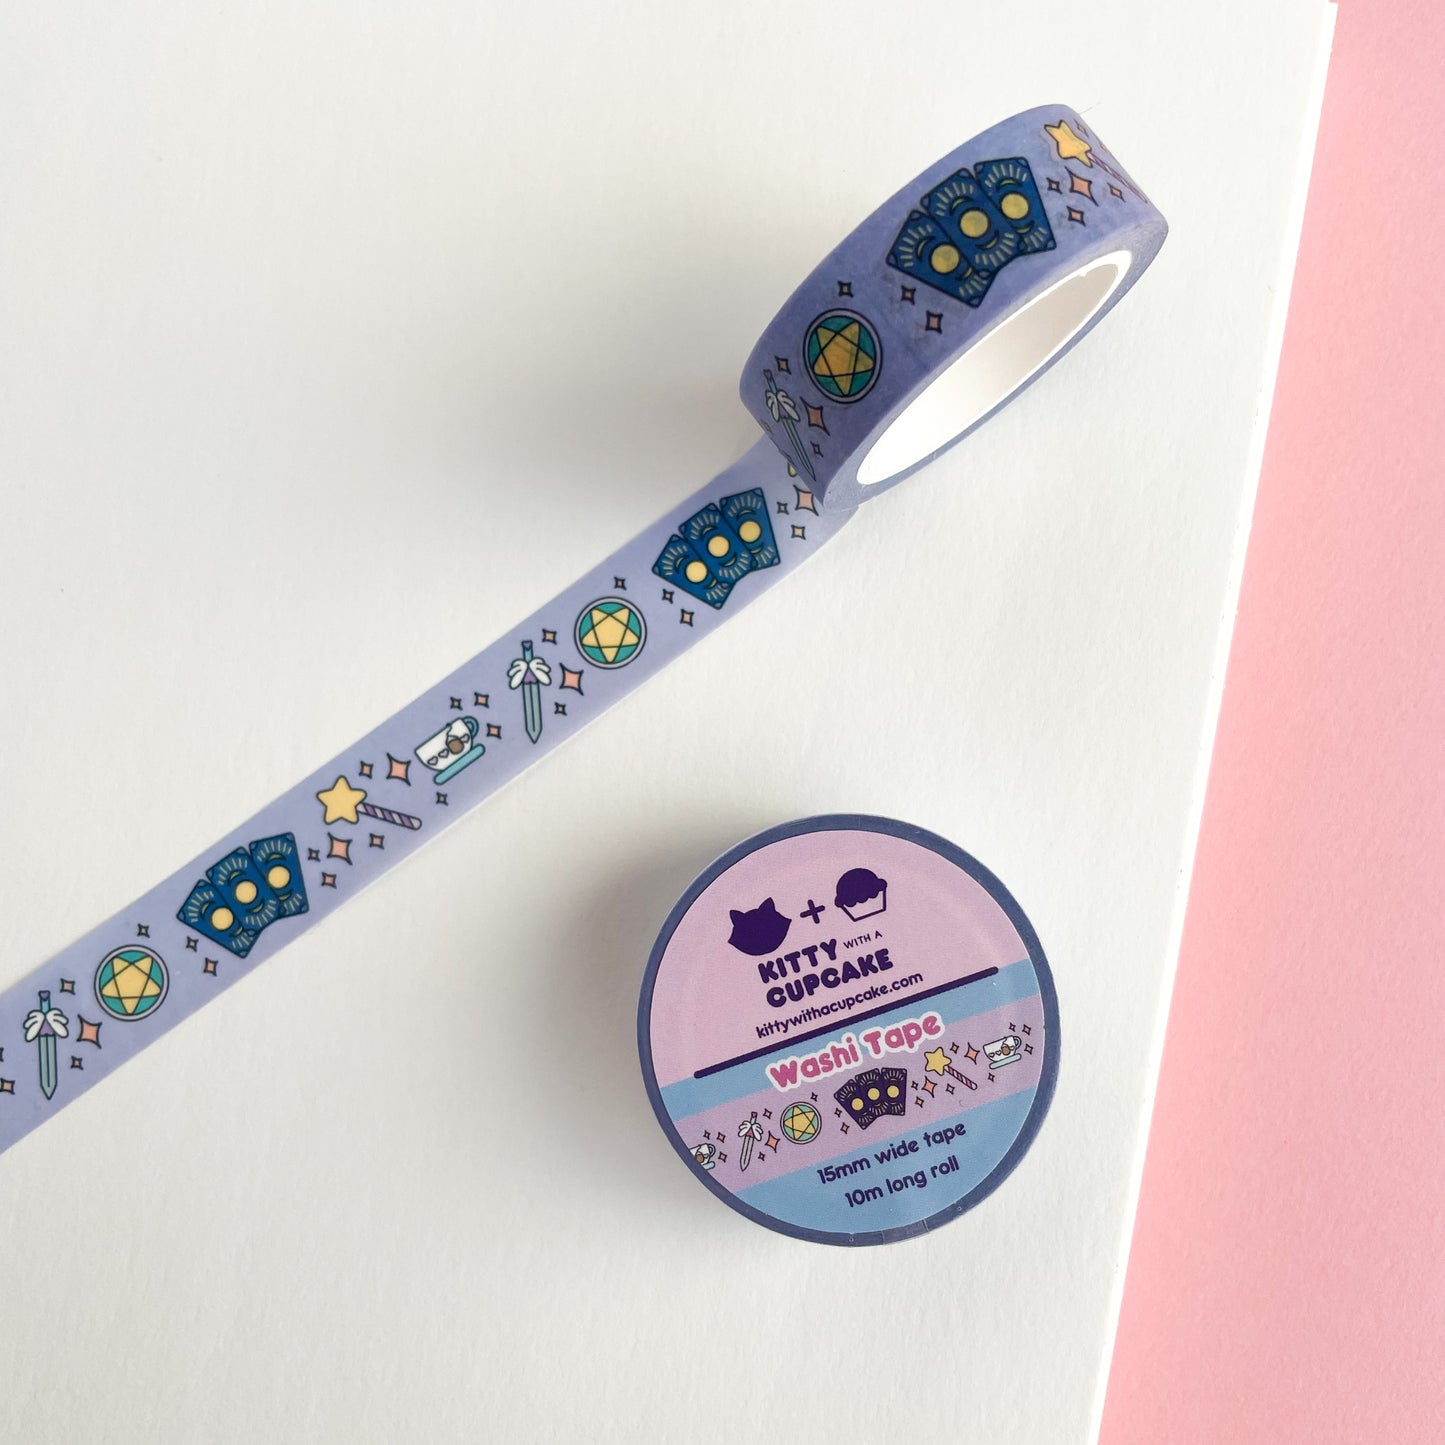 A washi tape roll. The tape features small tarot cards, a star wand, a teacup, a sword, and a pentacle all in pastel colors. There are orange pastel sparkles in between the items on a lavender background.